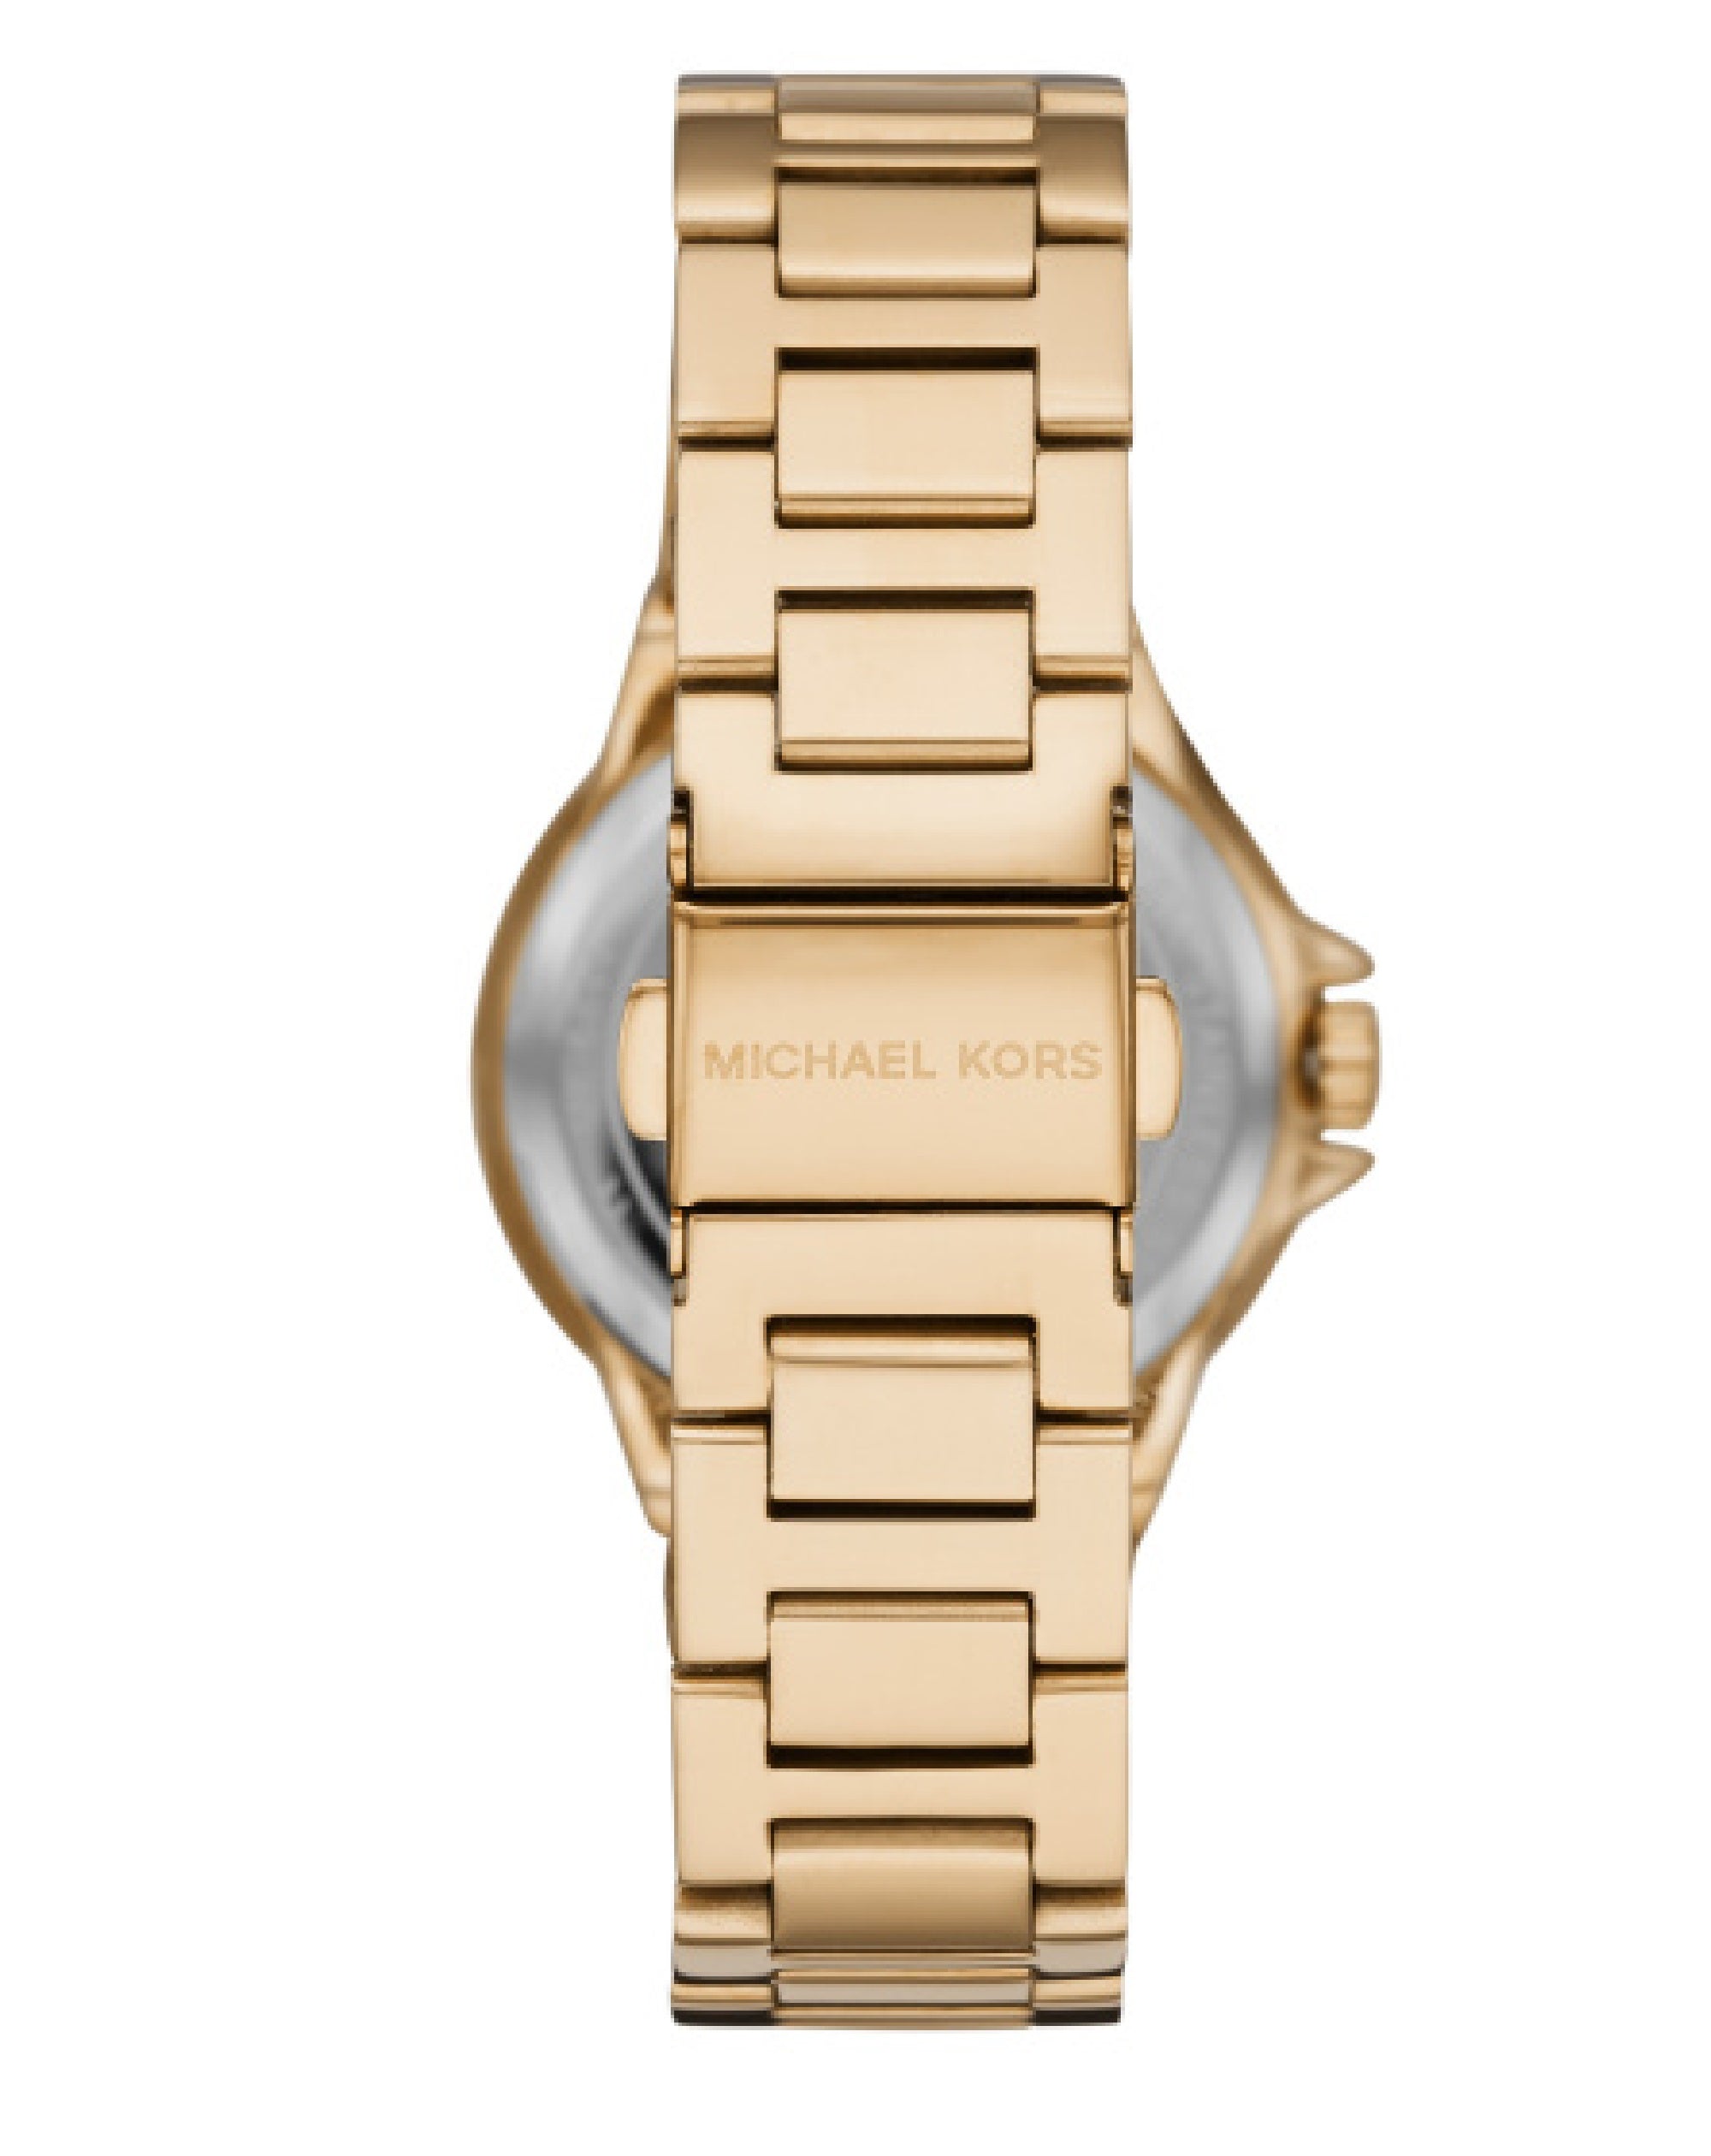 Michael Kors Womens Watches for sale in Syracuse New York  Facebook  Marketplace  Facebook